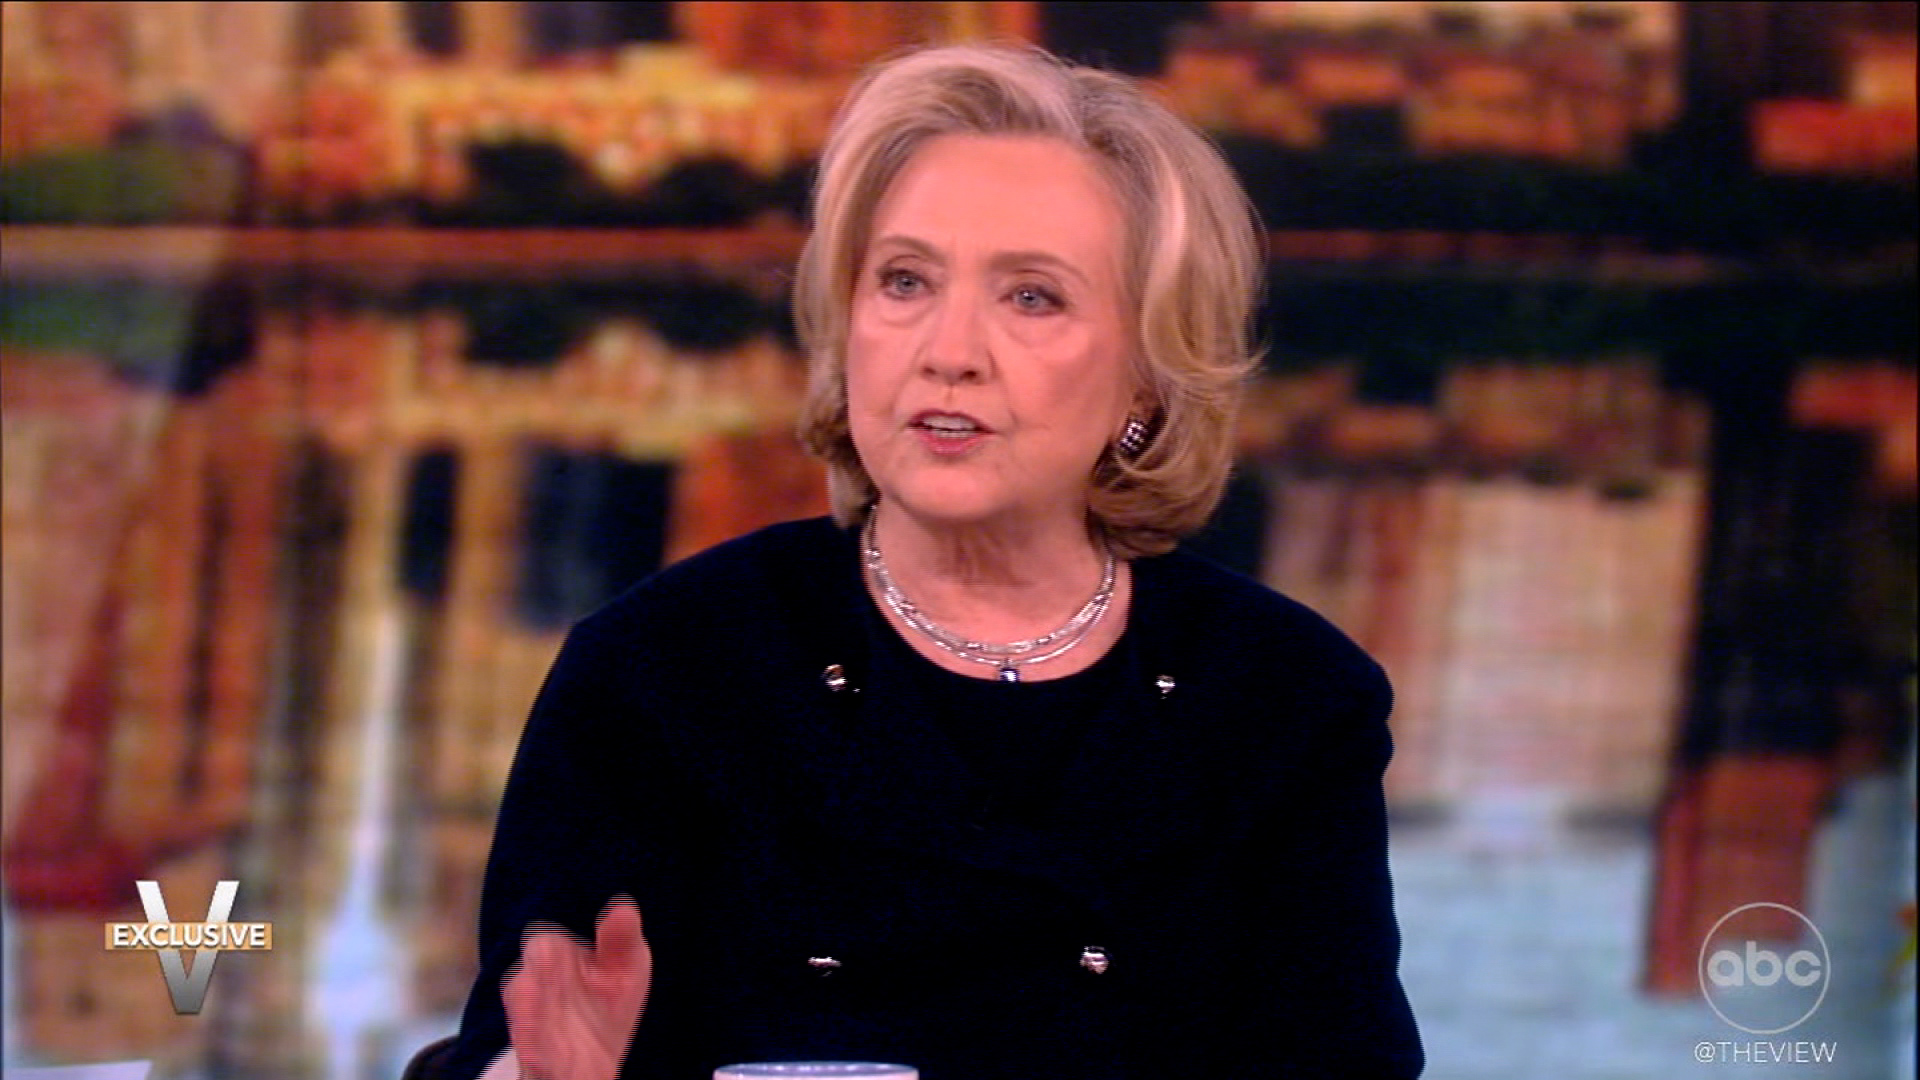 Hilary Clinton during an interview on ABC's "The View" on November 8.